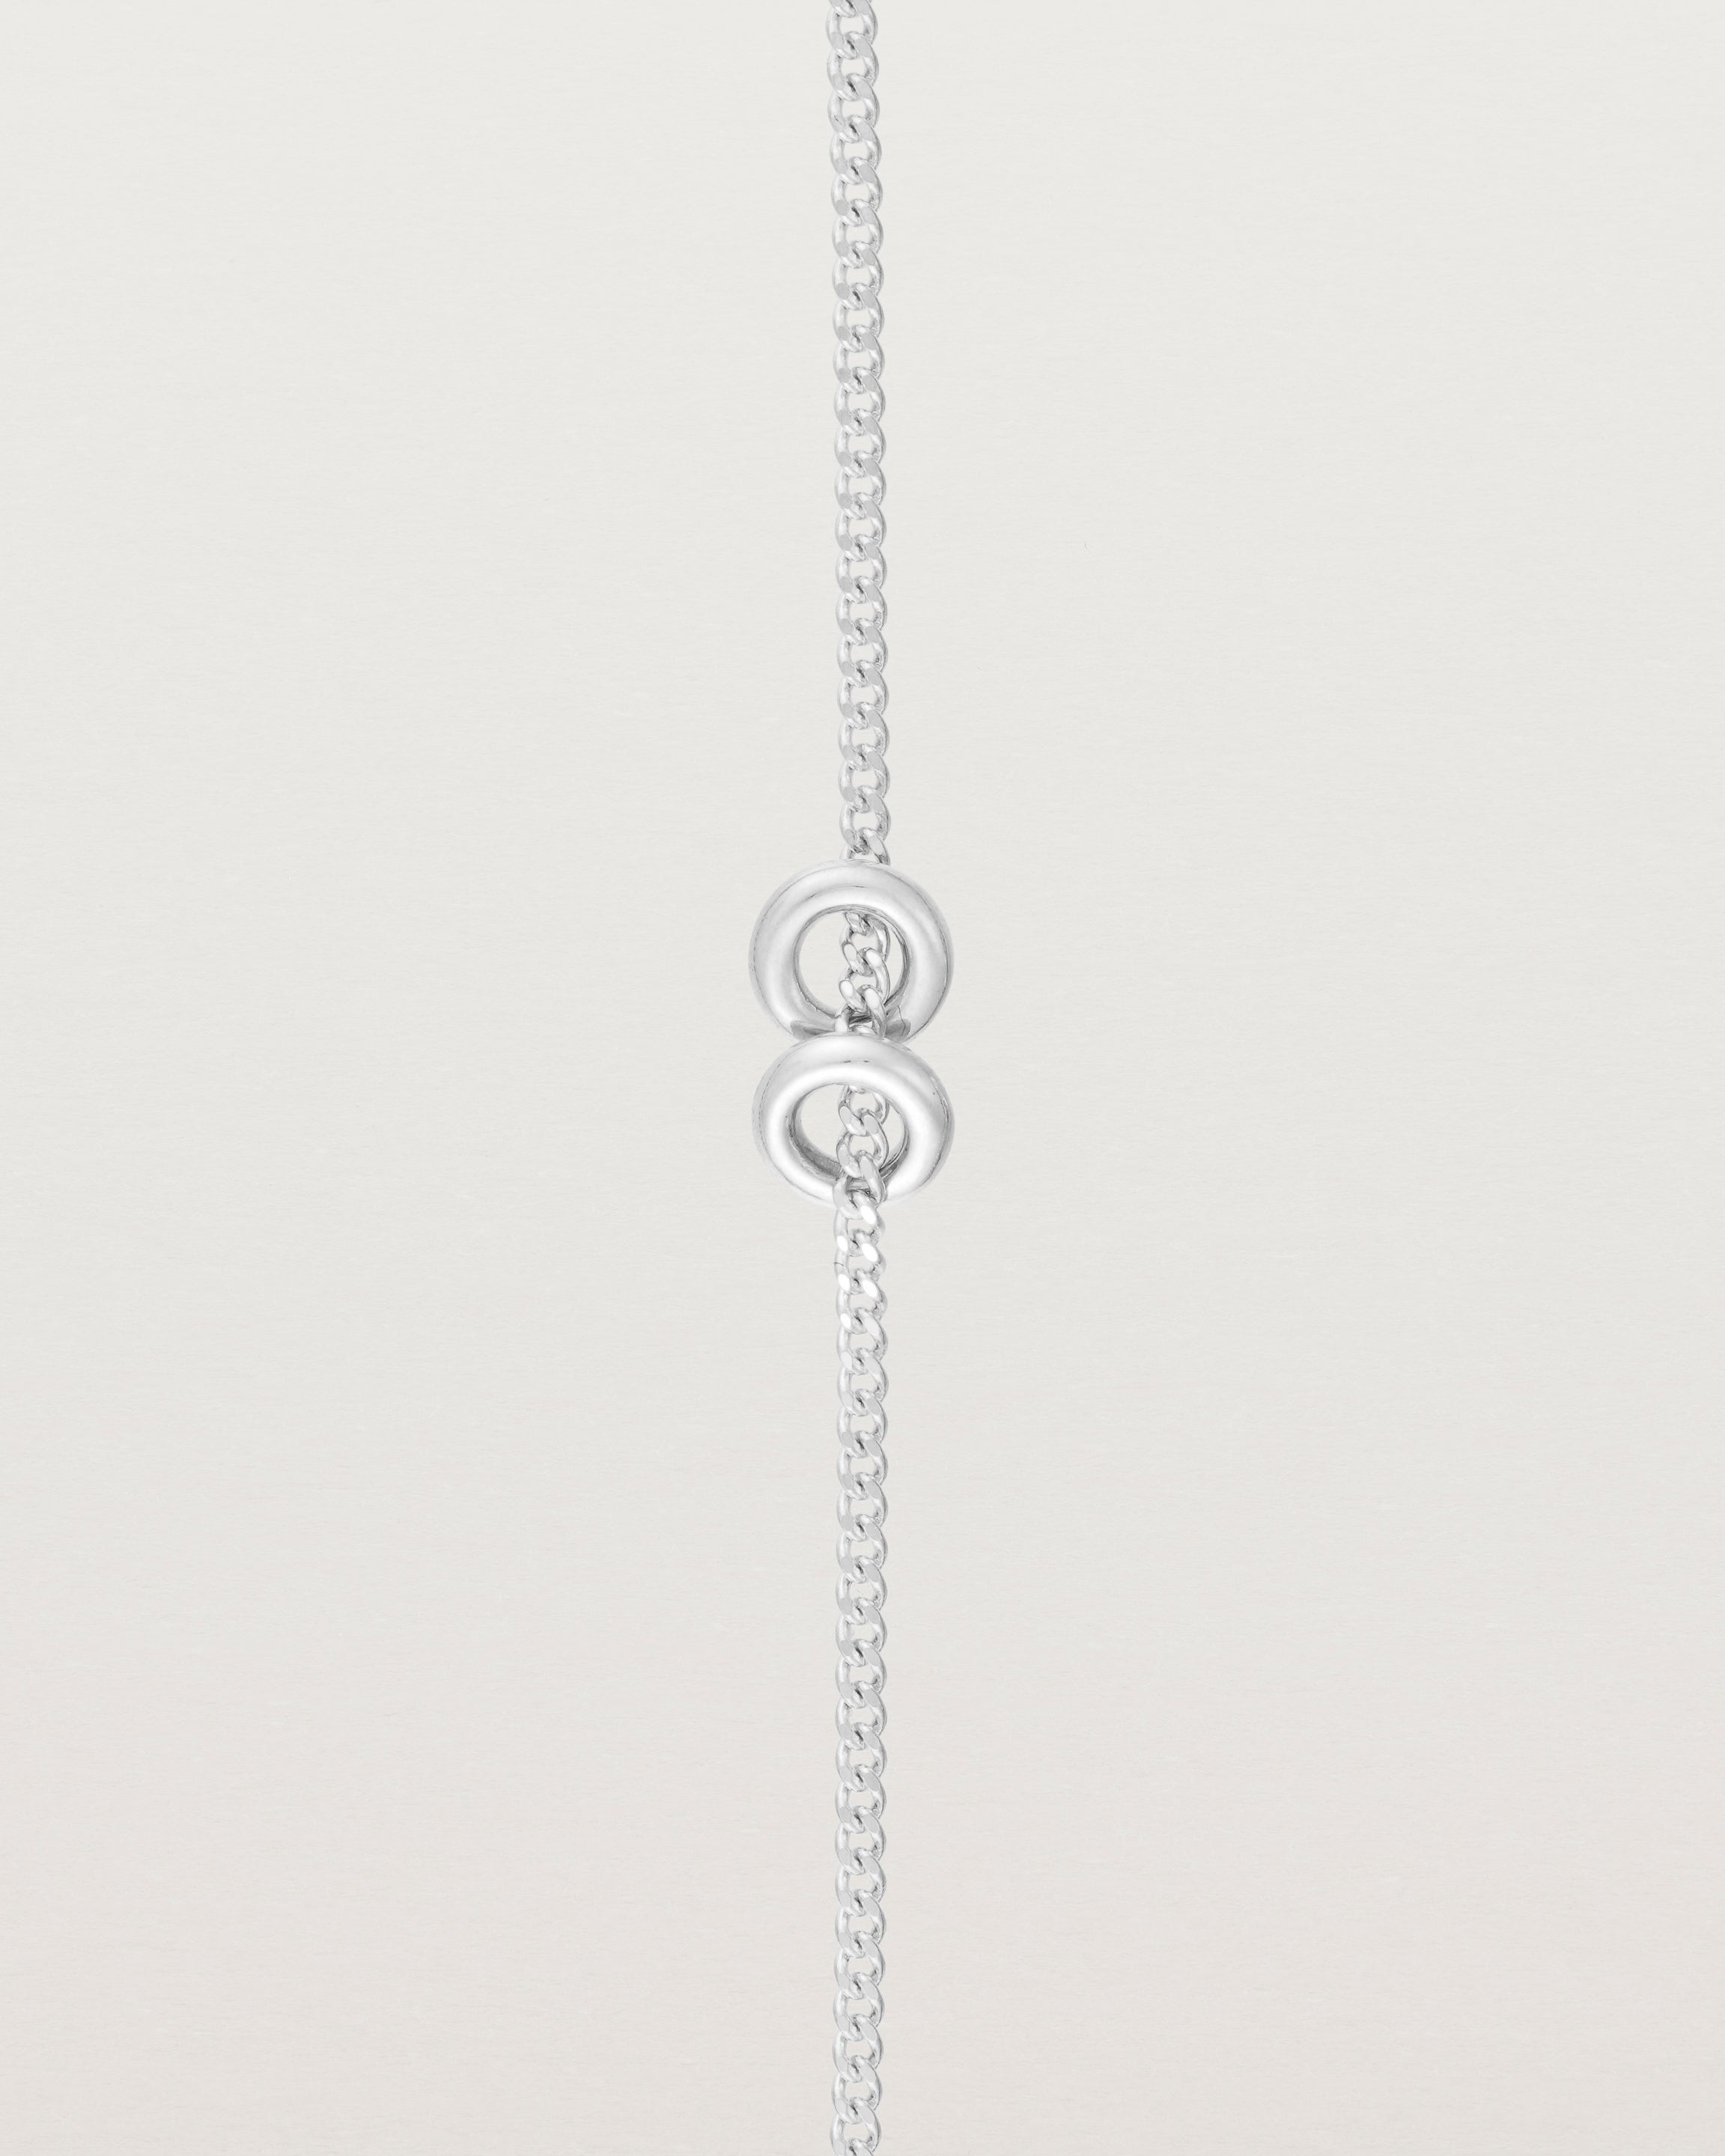 close up view of the Aether Bracelet showing two round charm in sterling silver